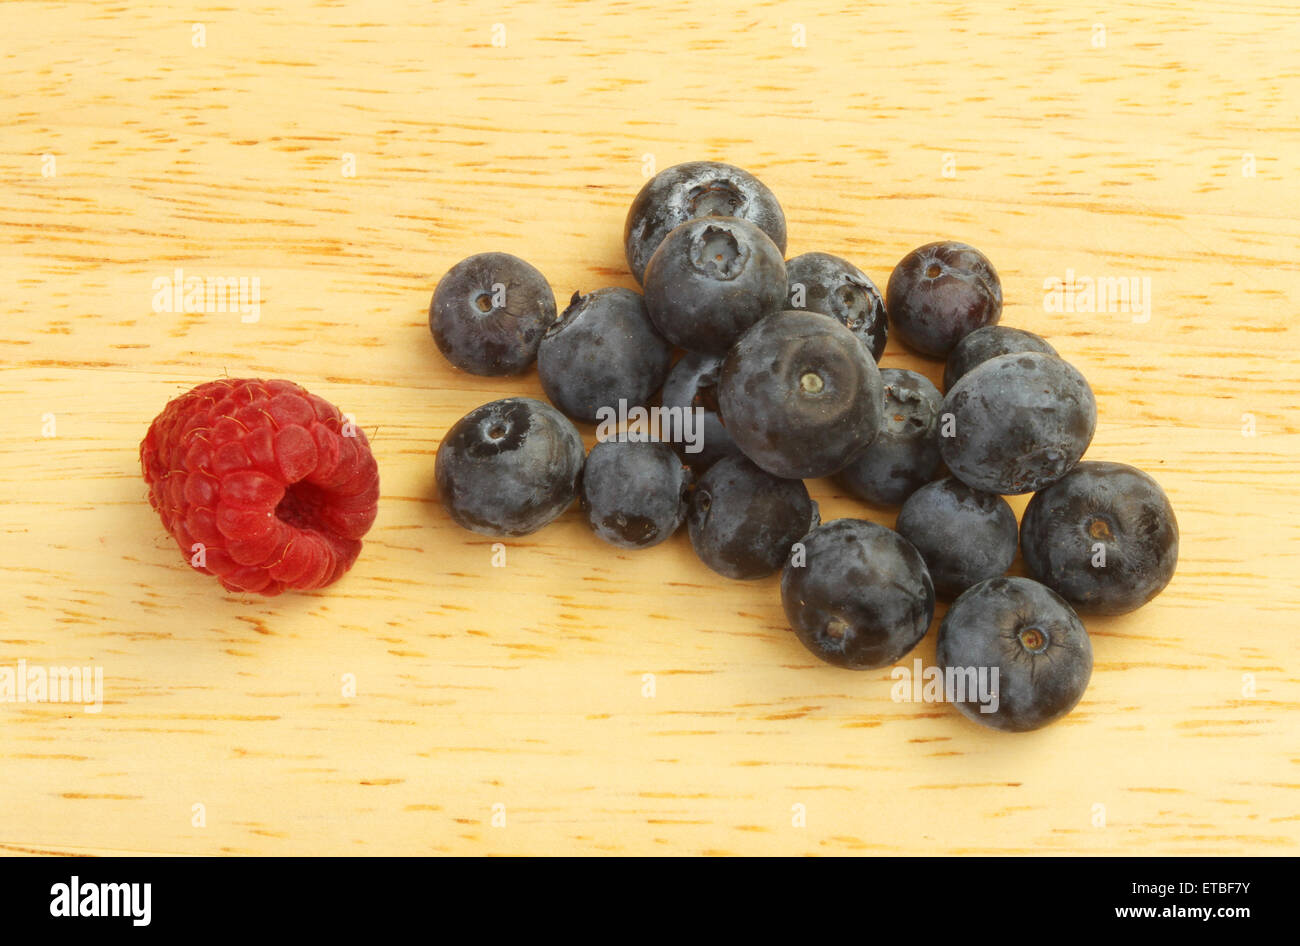 Blueberries and a single raspberry on a wooden board Stock Photo